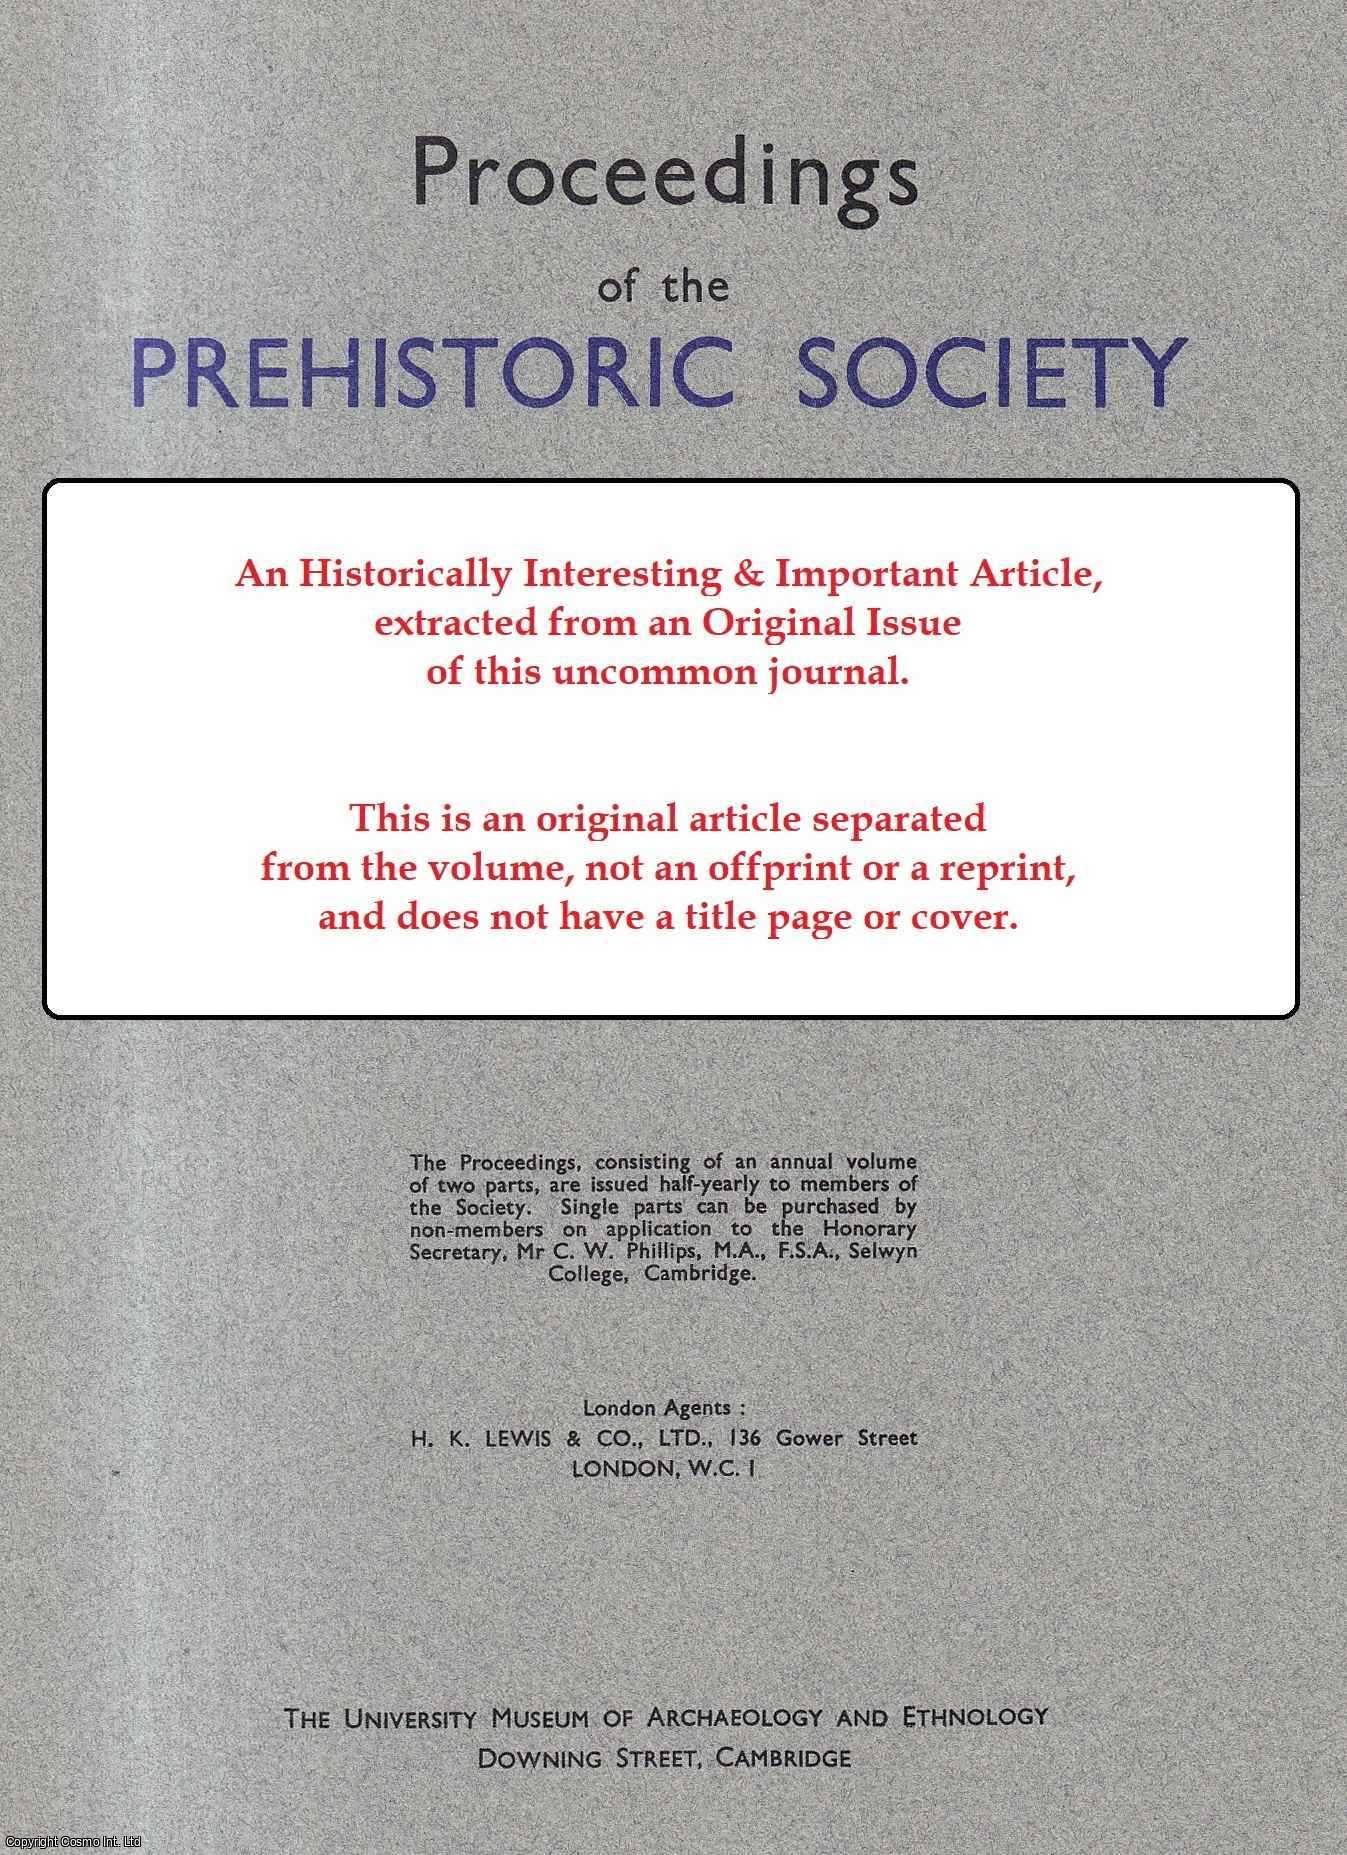 S. C. Stanford - Bromfield, Shropshire - Neolithic, Beaker and Bronze Age Sites, 1966-79. An original article from Proceedings of the Prehistoric Society, 1982.